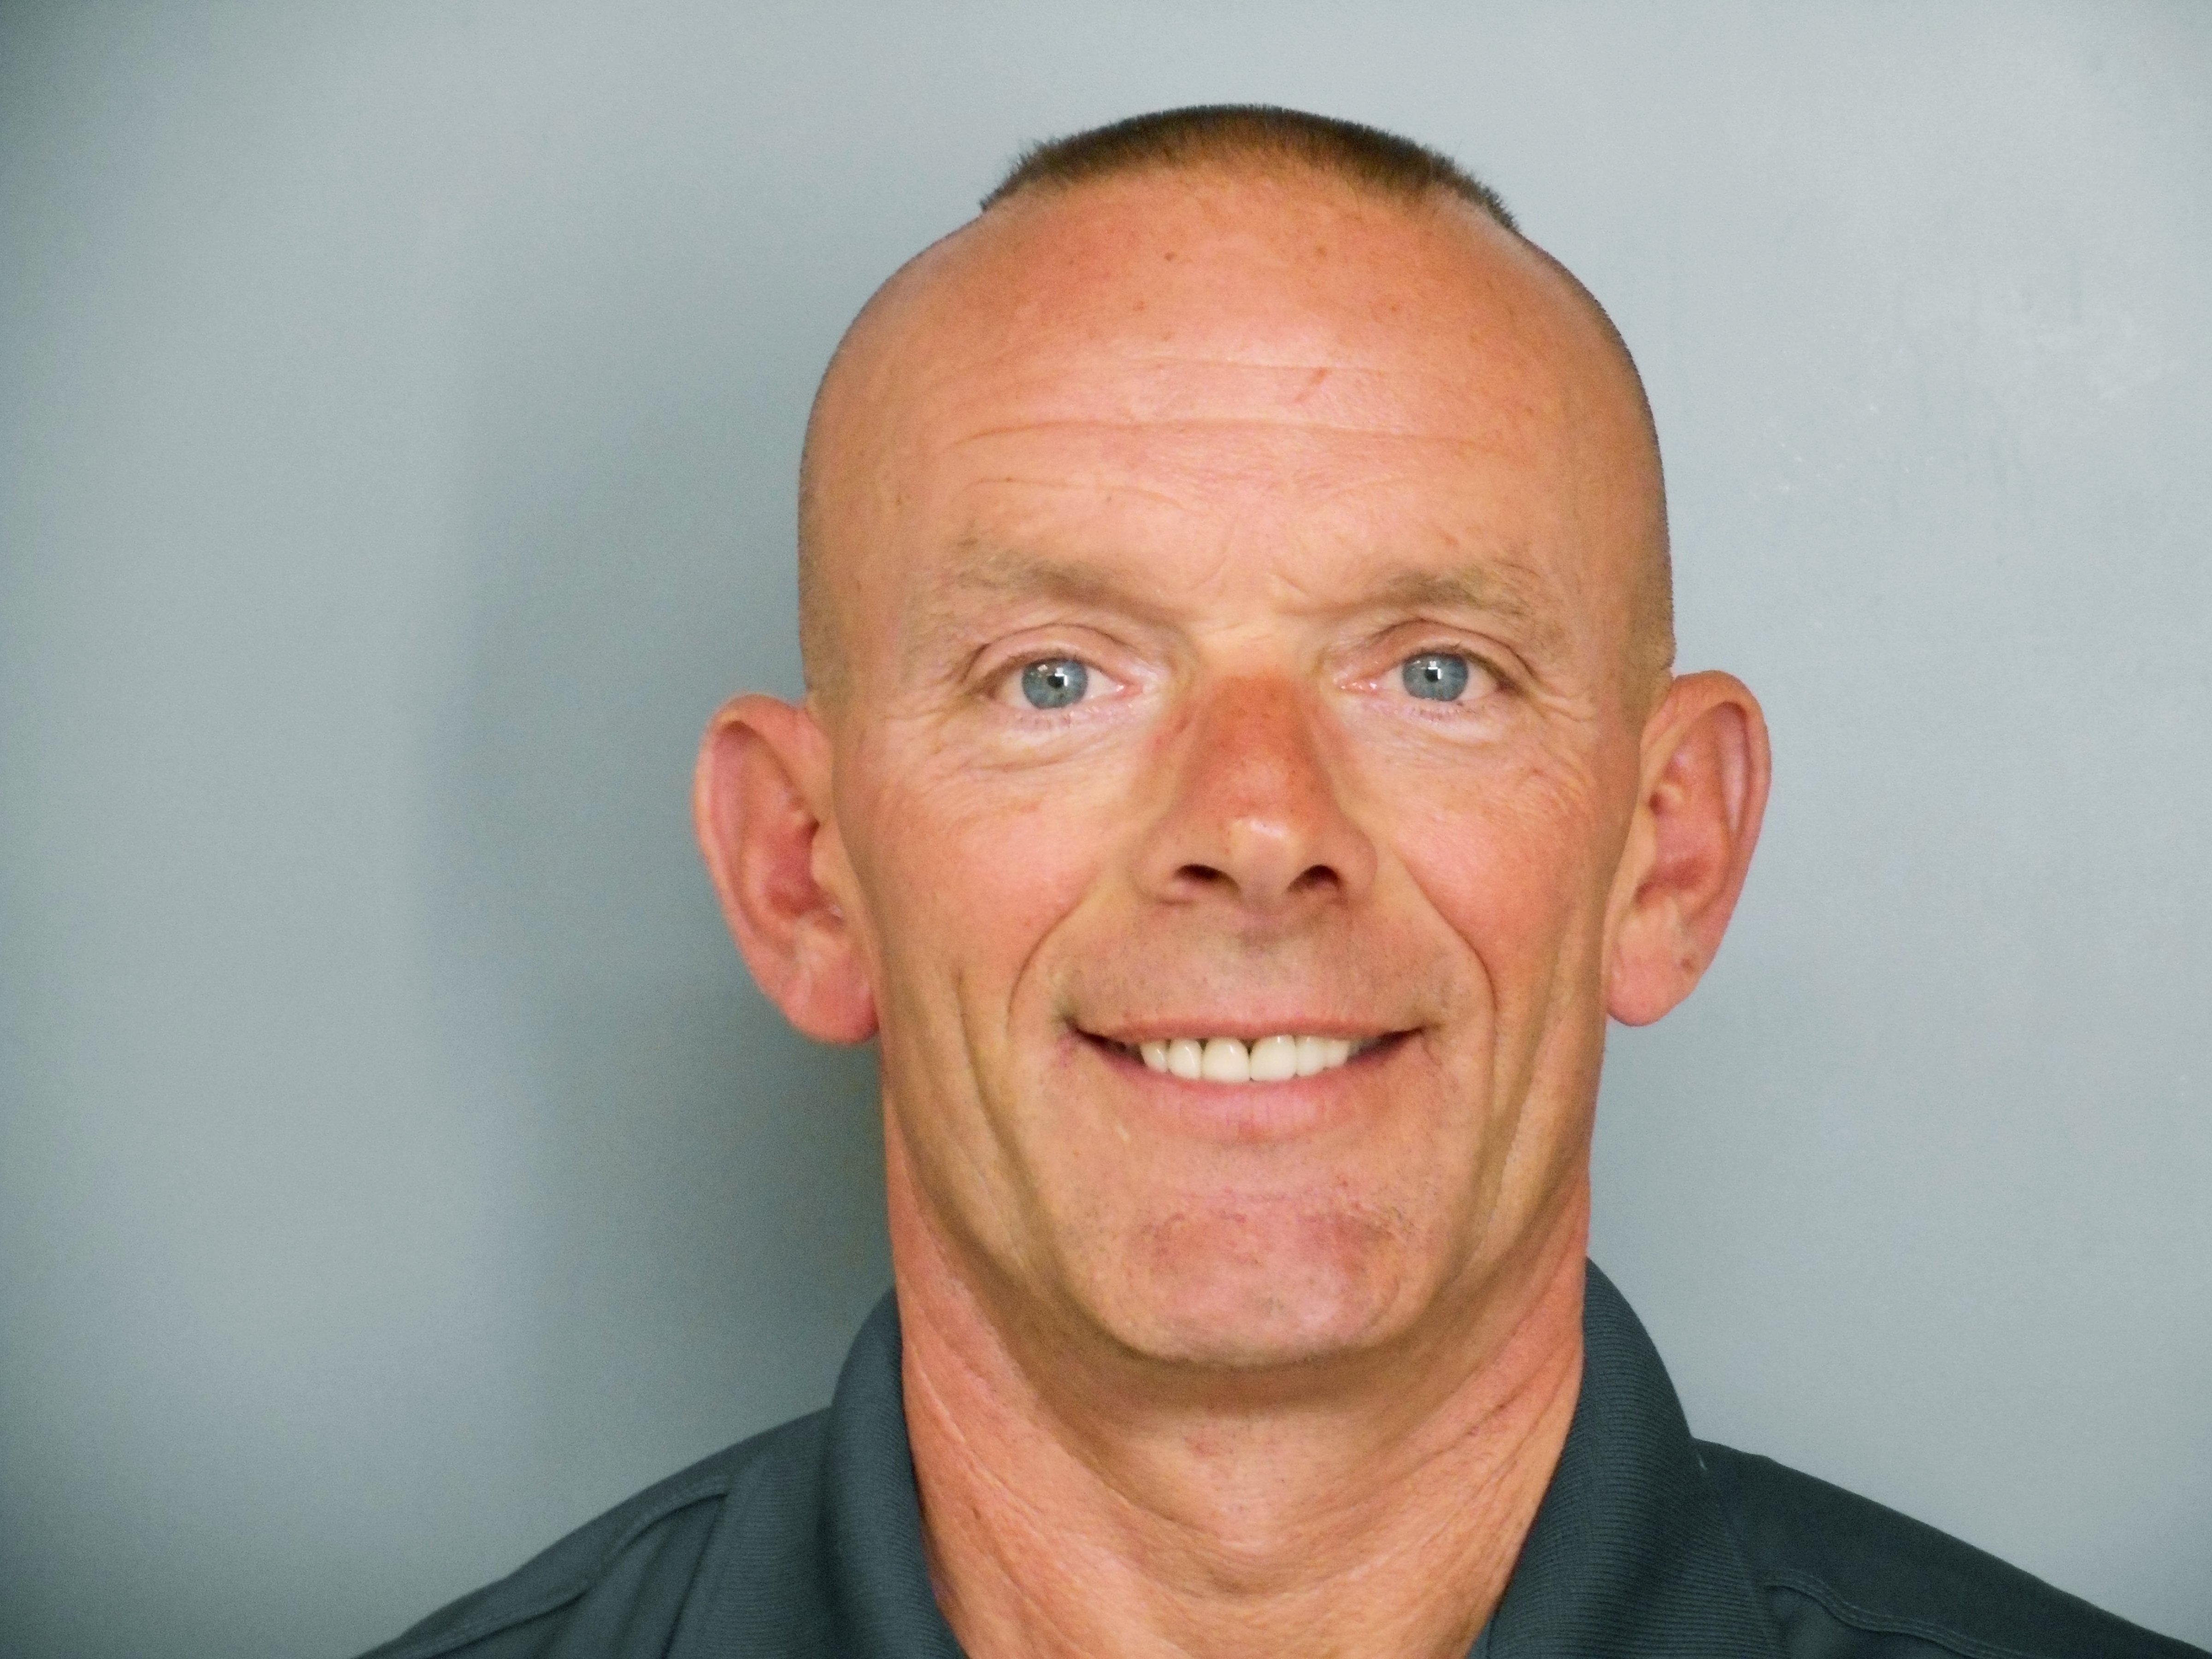 This undated file photo provided by the Fox Lake Police Department shows Lt. Charles Joseph Gliniewicz, who was fatally shot in Fox Lake, Ill in Sept. 2015. (AP)